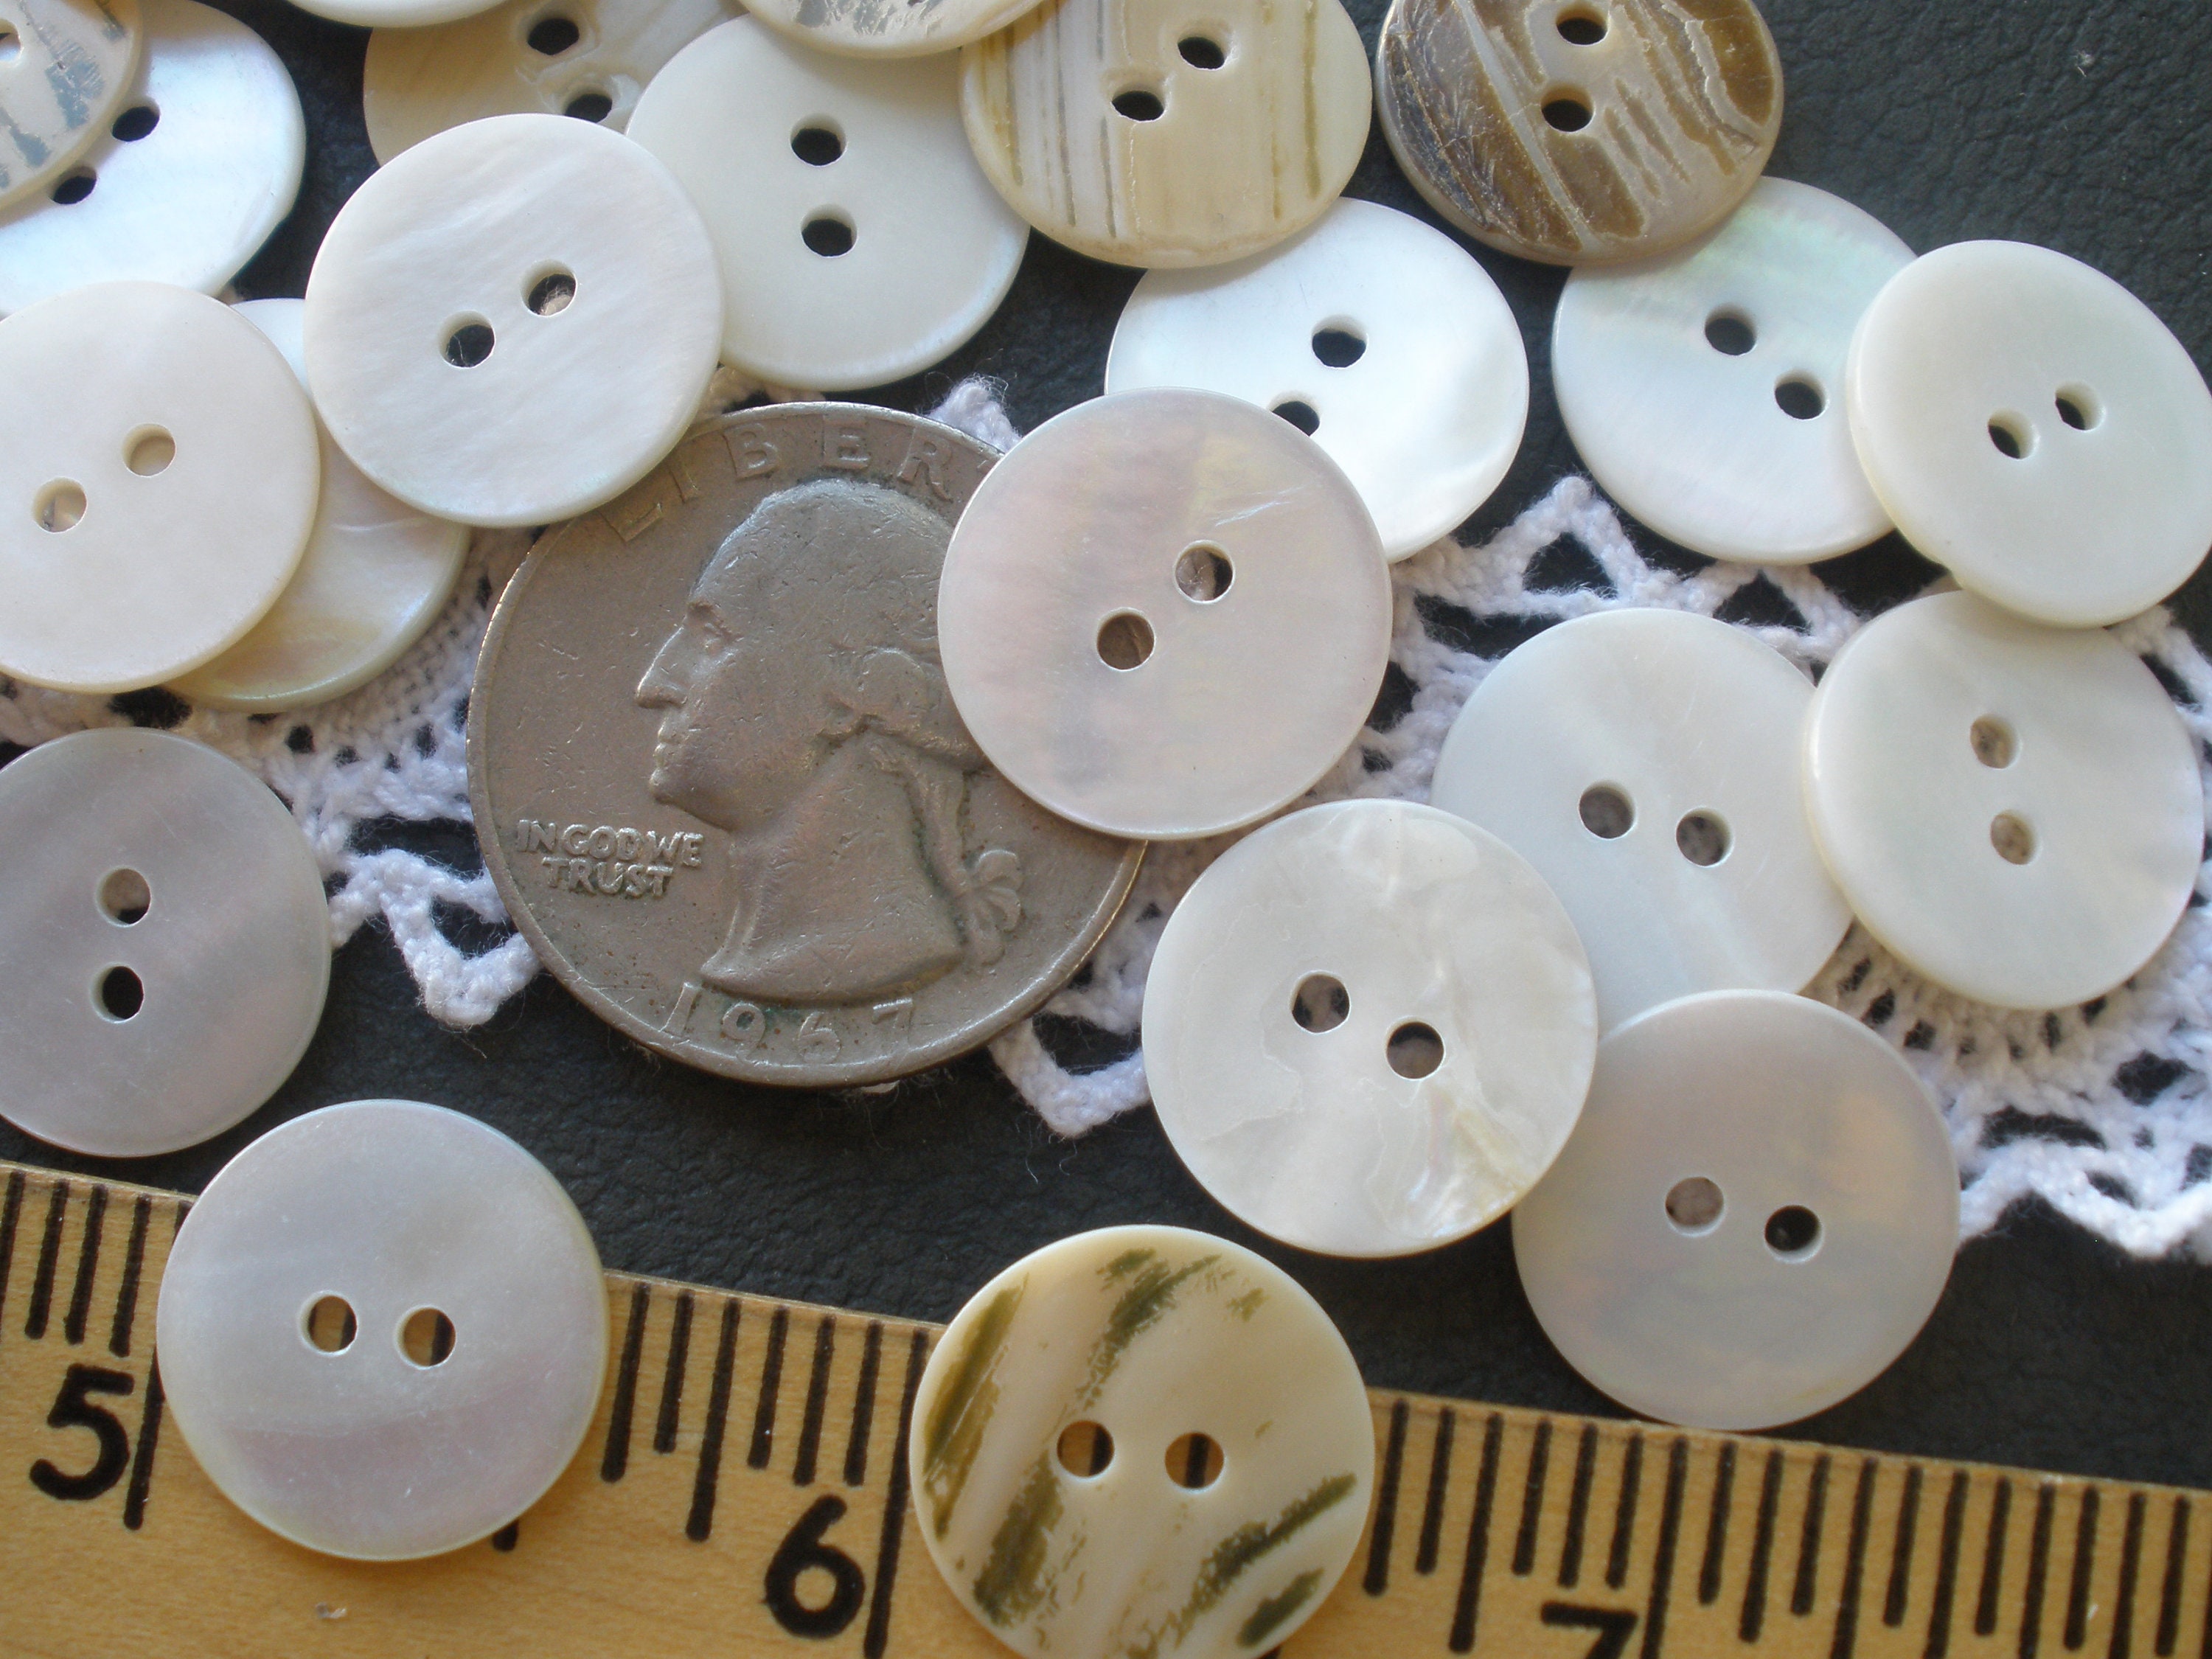 Pearly White Buttons (18mm) - 21205281